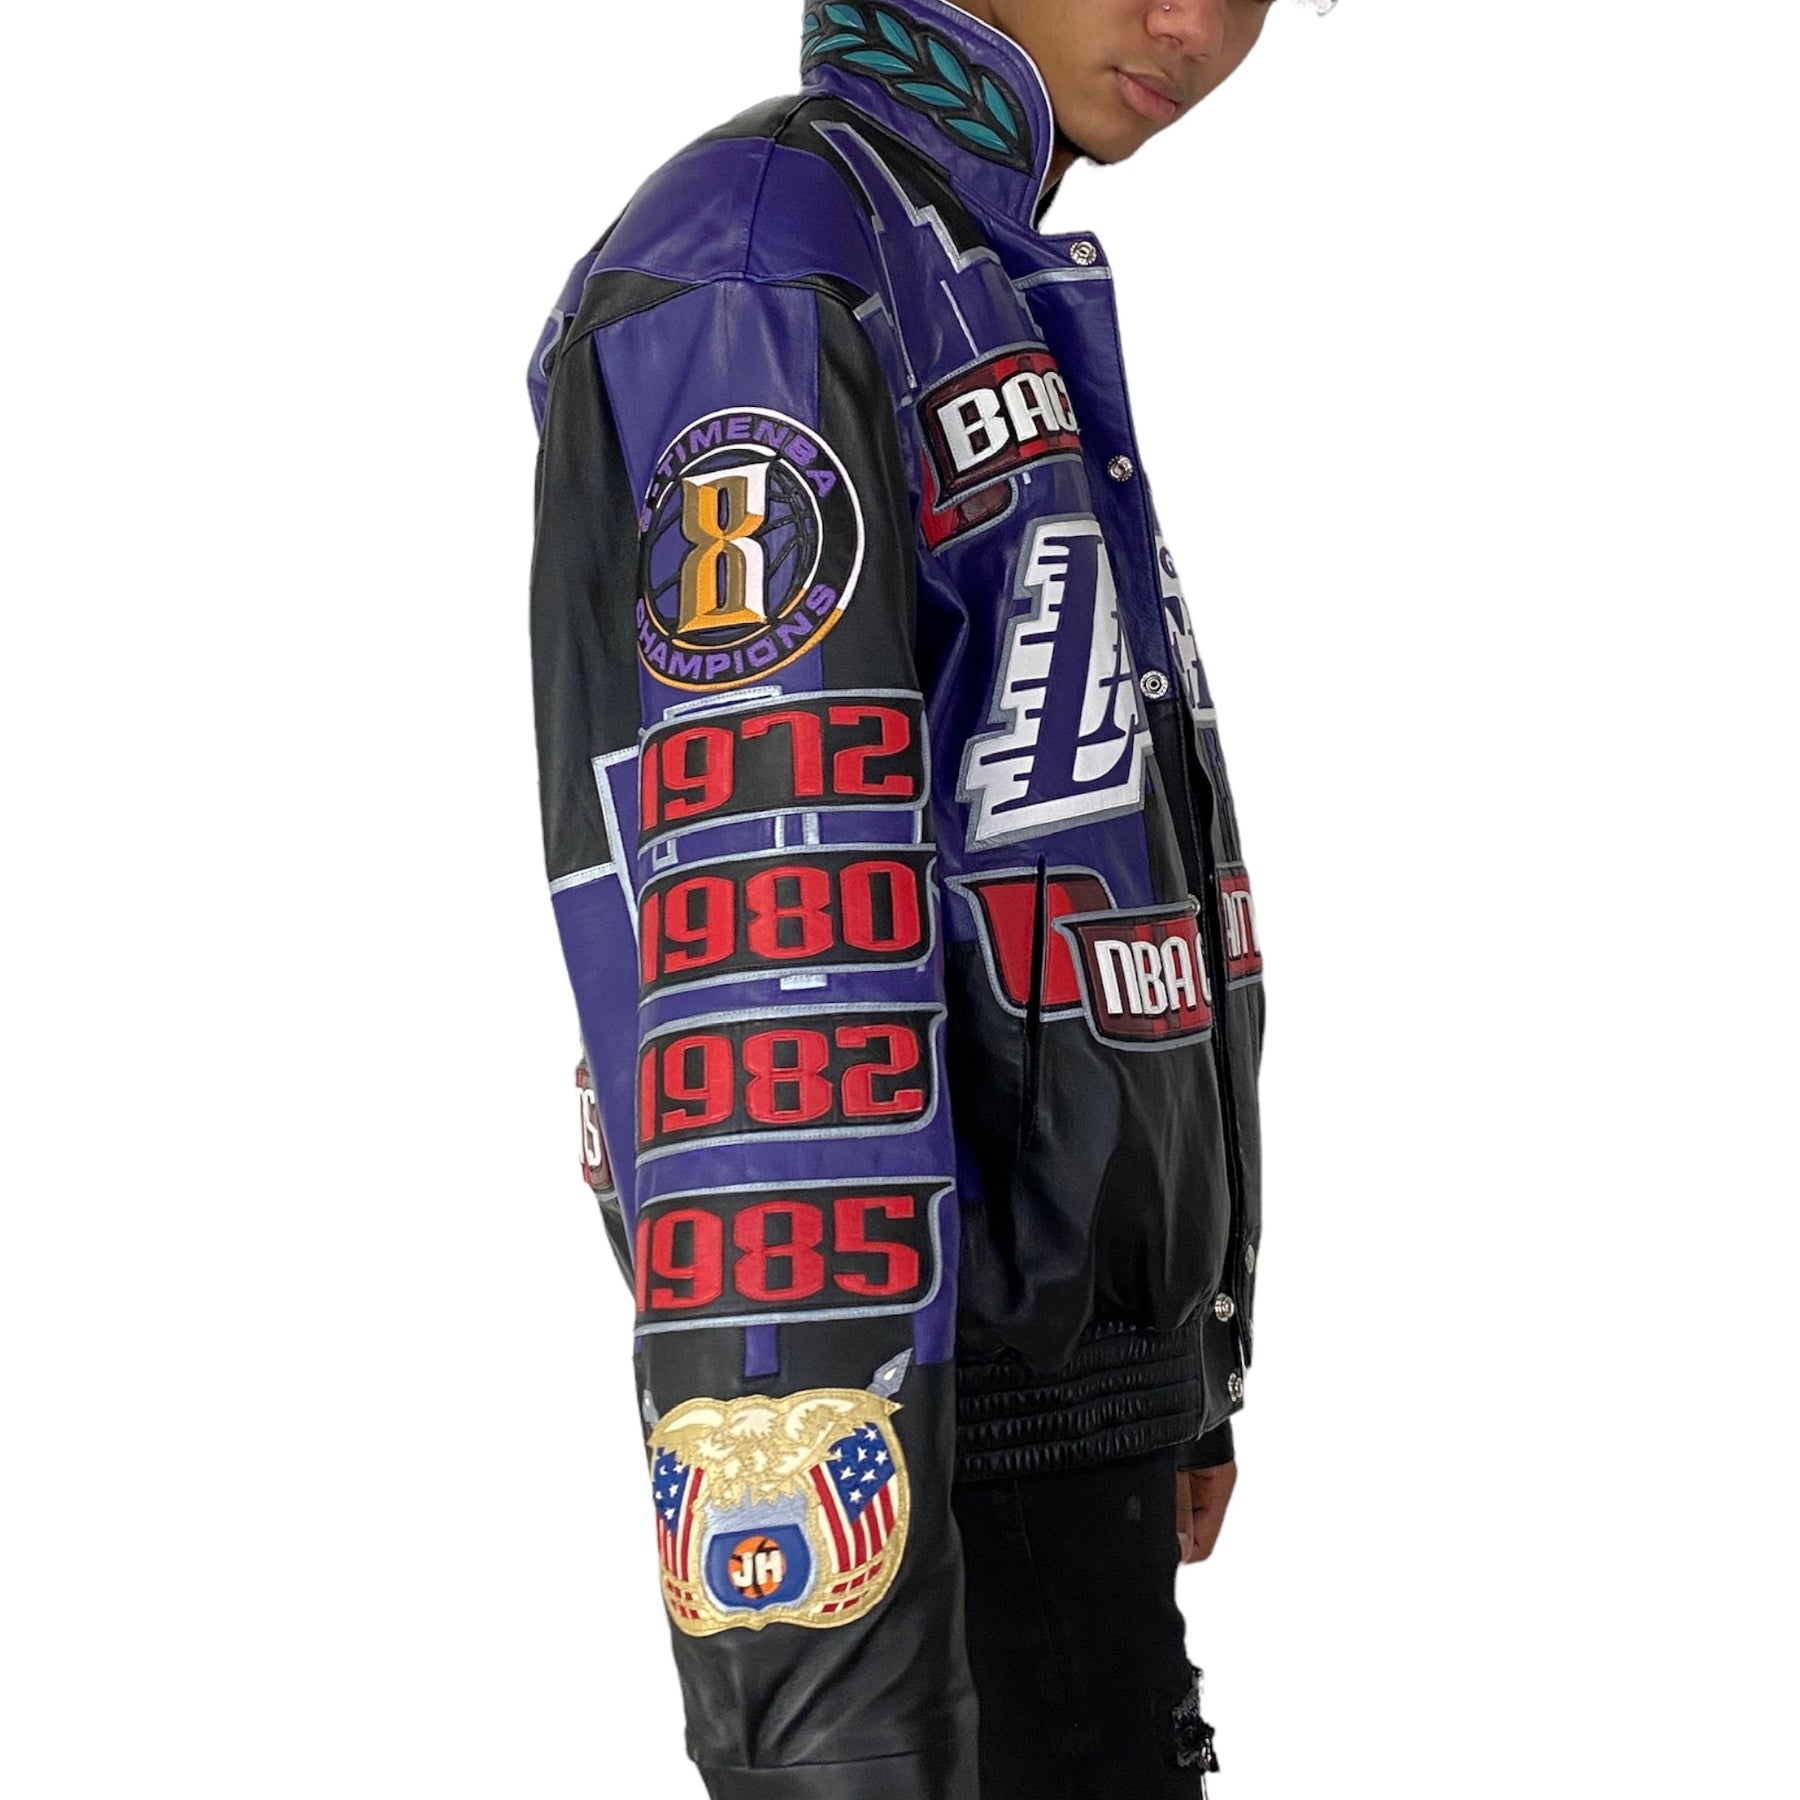 LOS ANGELES LAKERS 2001 CHAMPIONSHIP GENUINE LEATHER JACKET